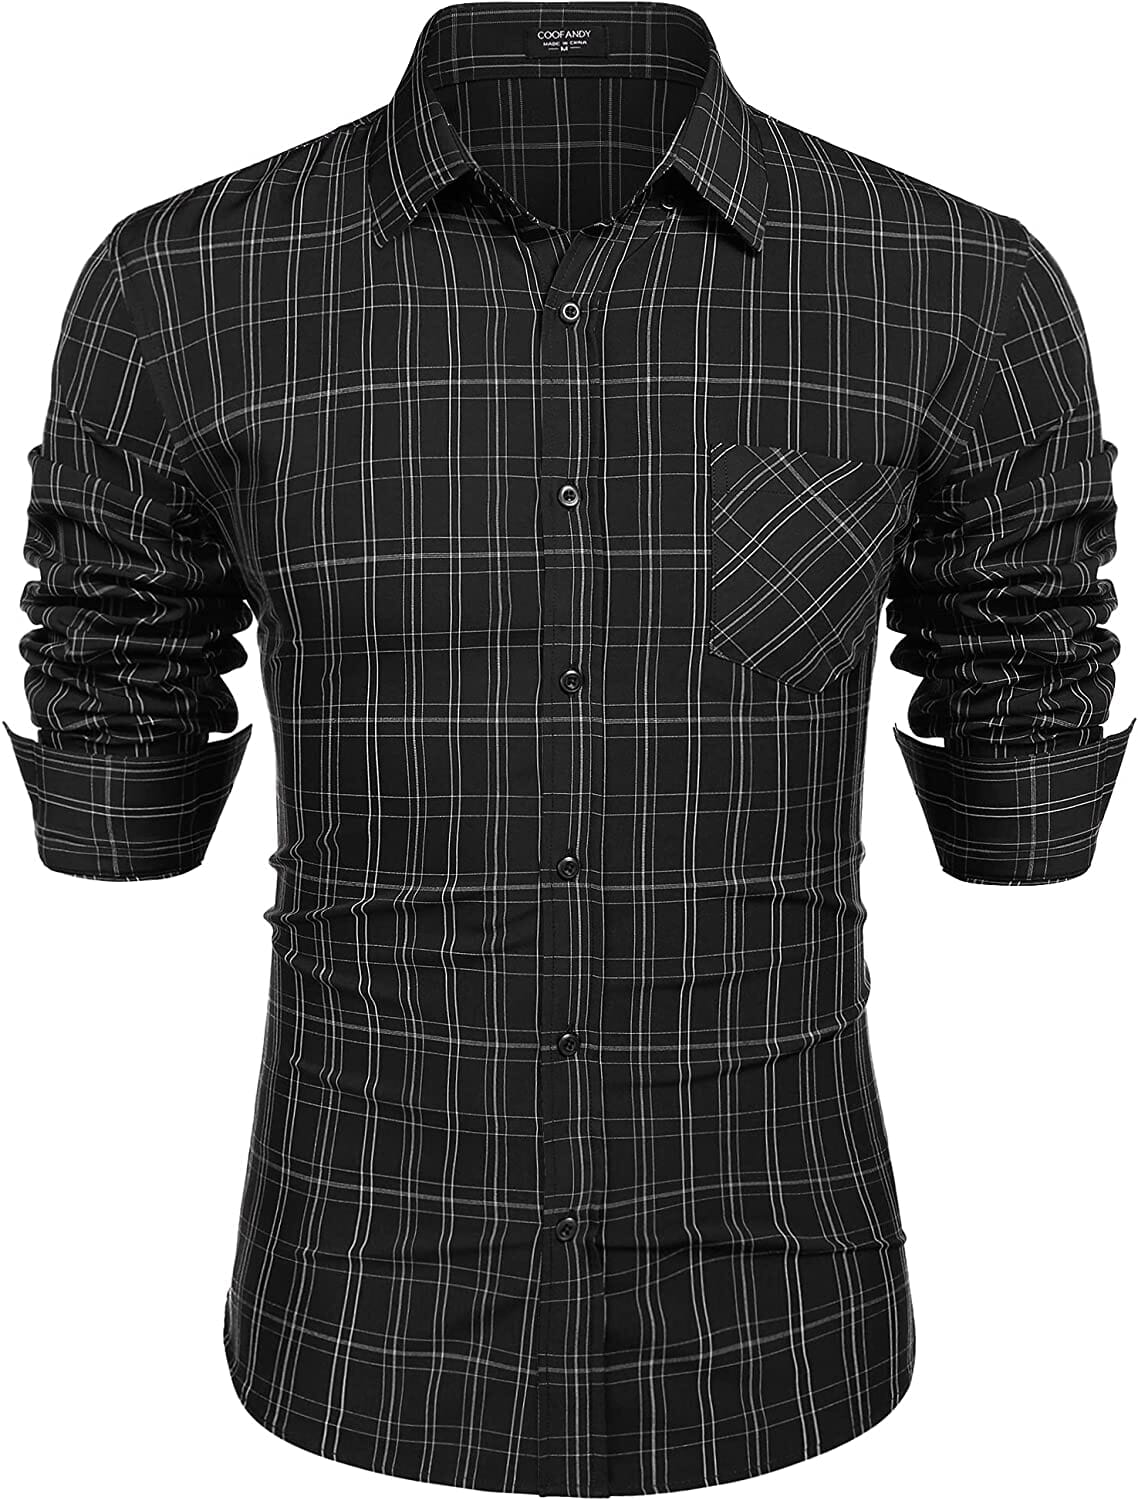 Business Button Up Plaid Shirts (US Only) Shirts Coofandy's Black S 